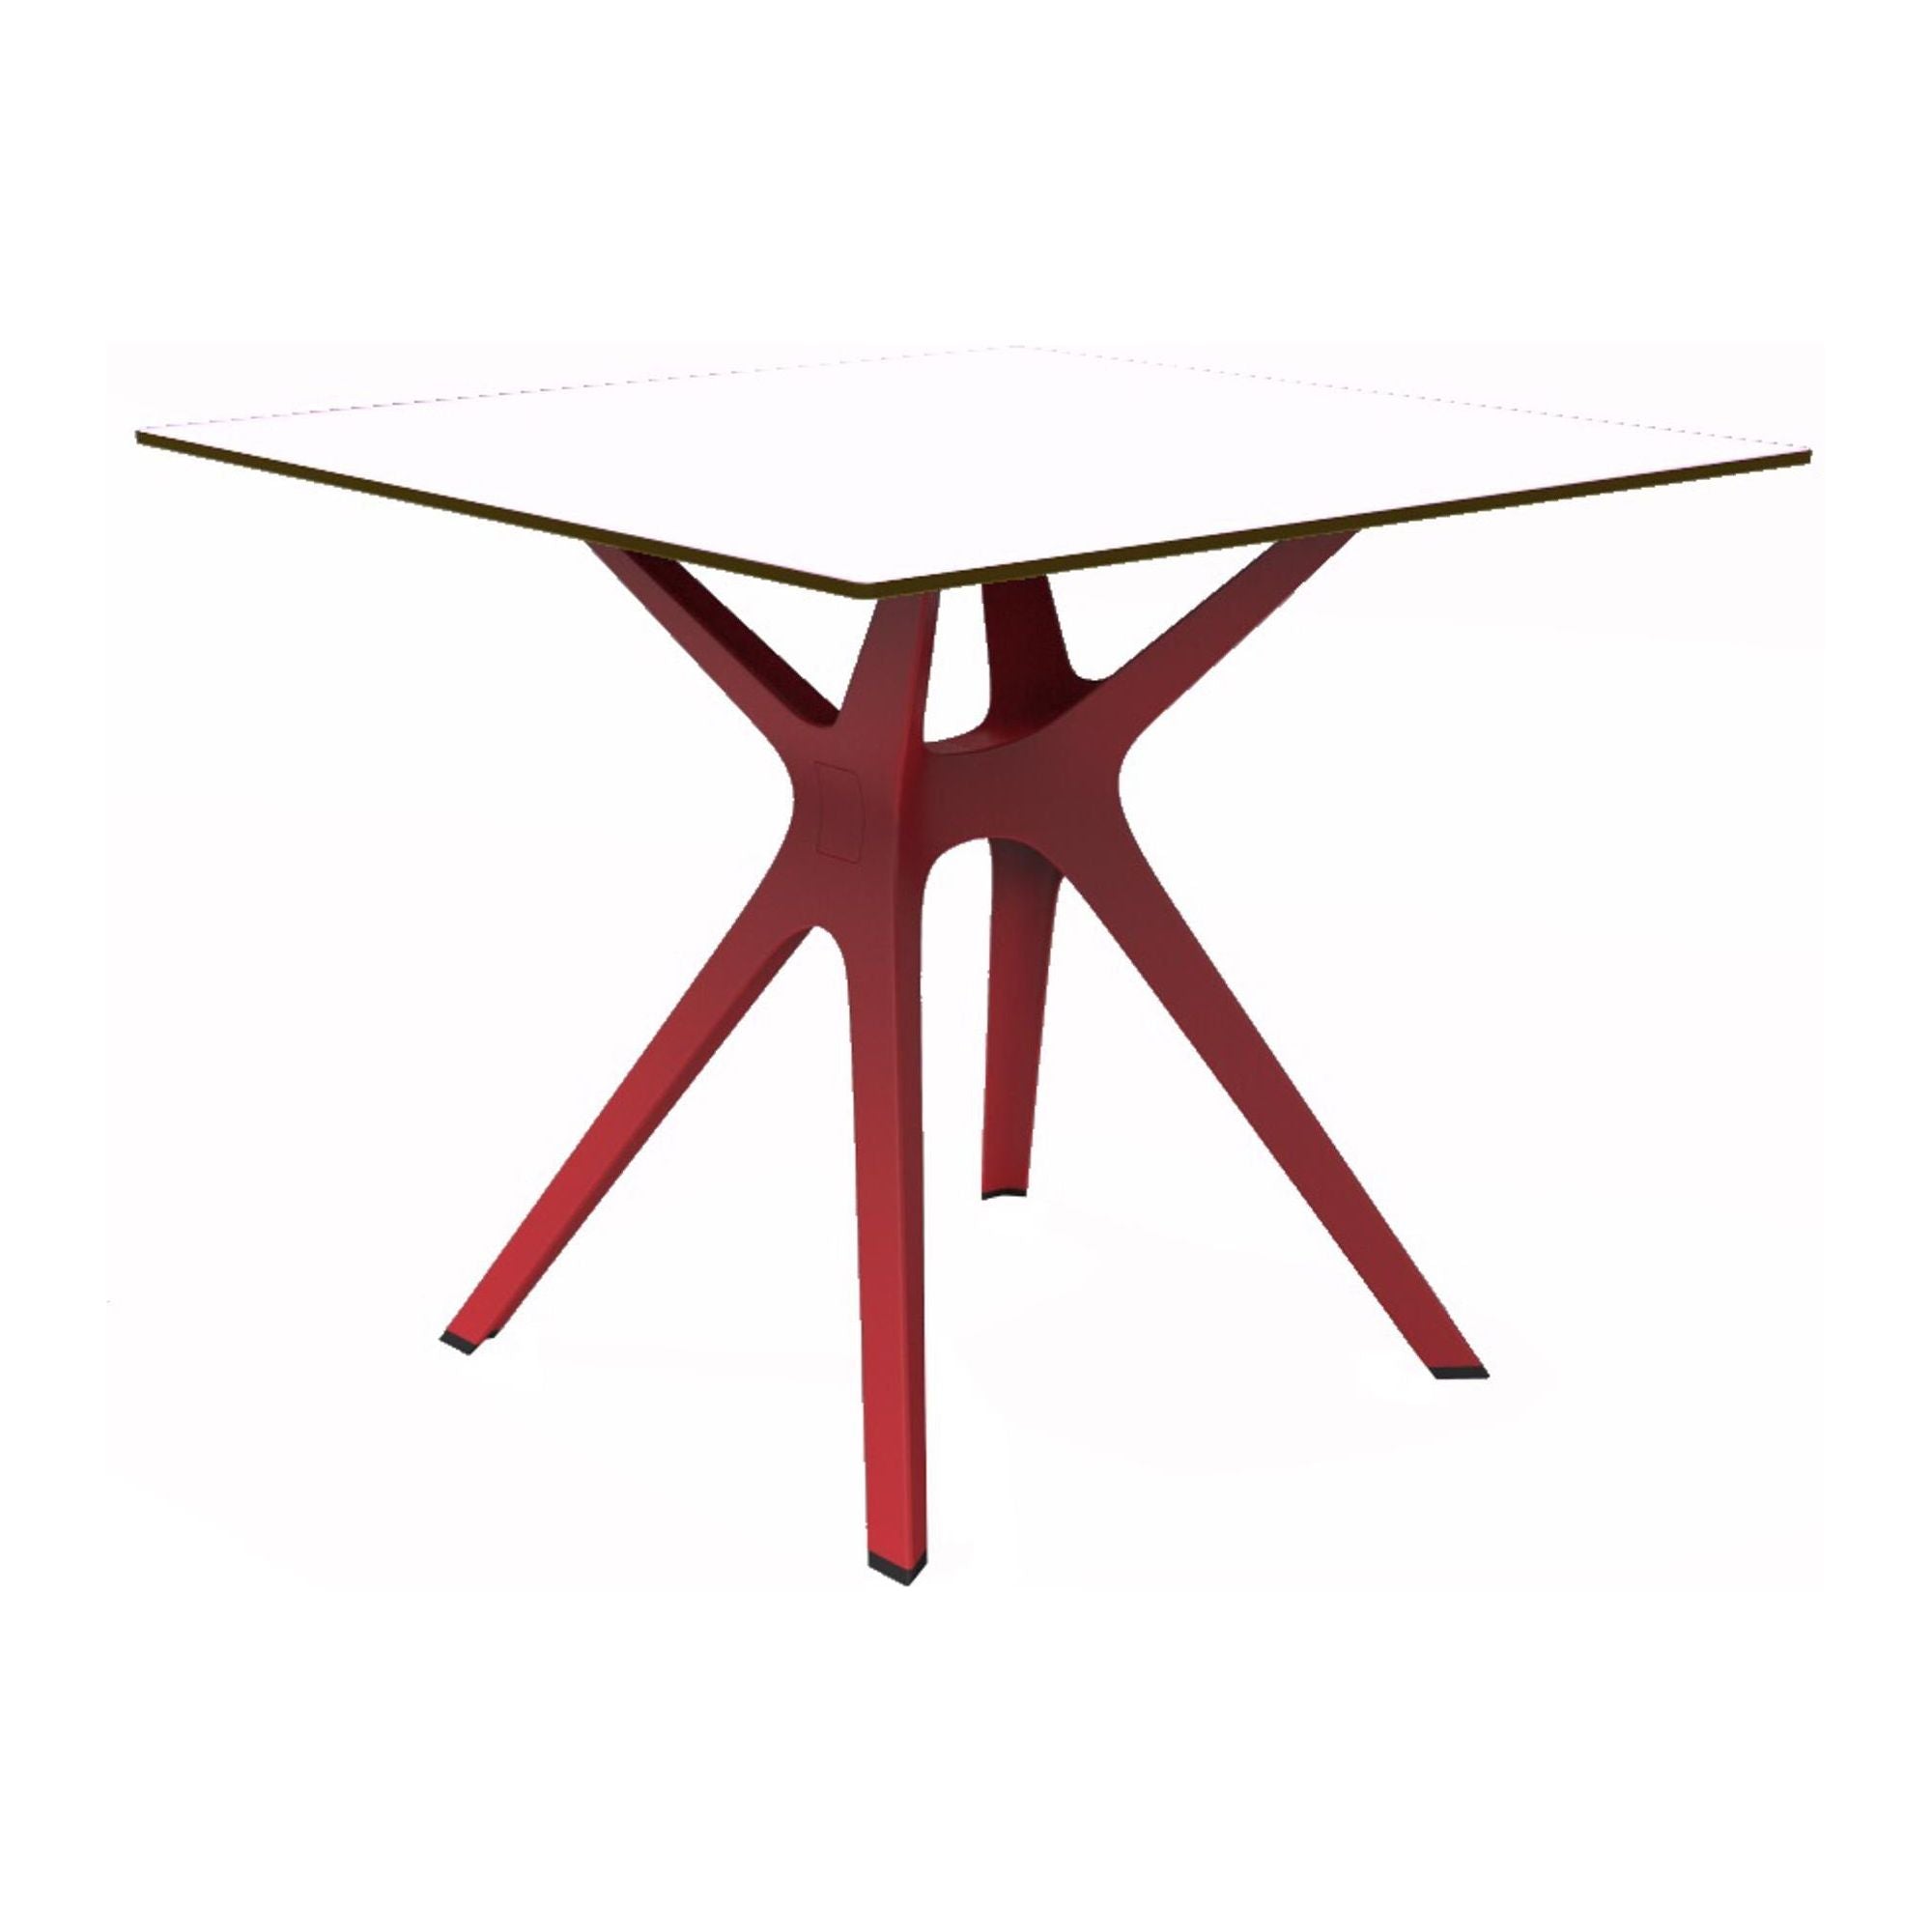 Resol Vela s square table indoors, outdoor 90x90 red base